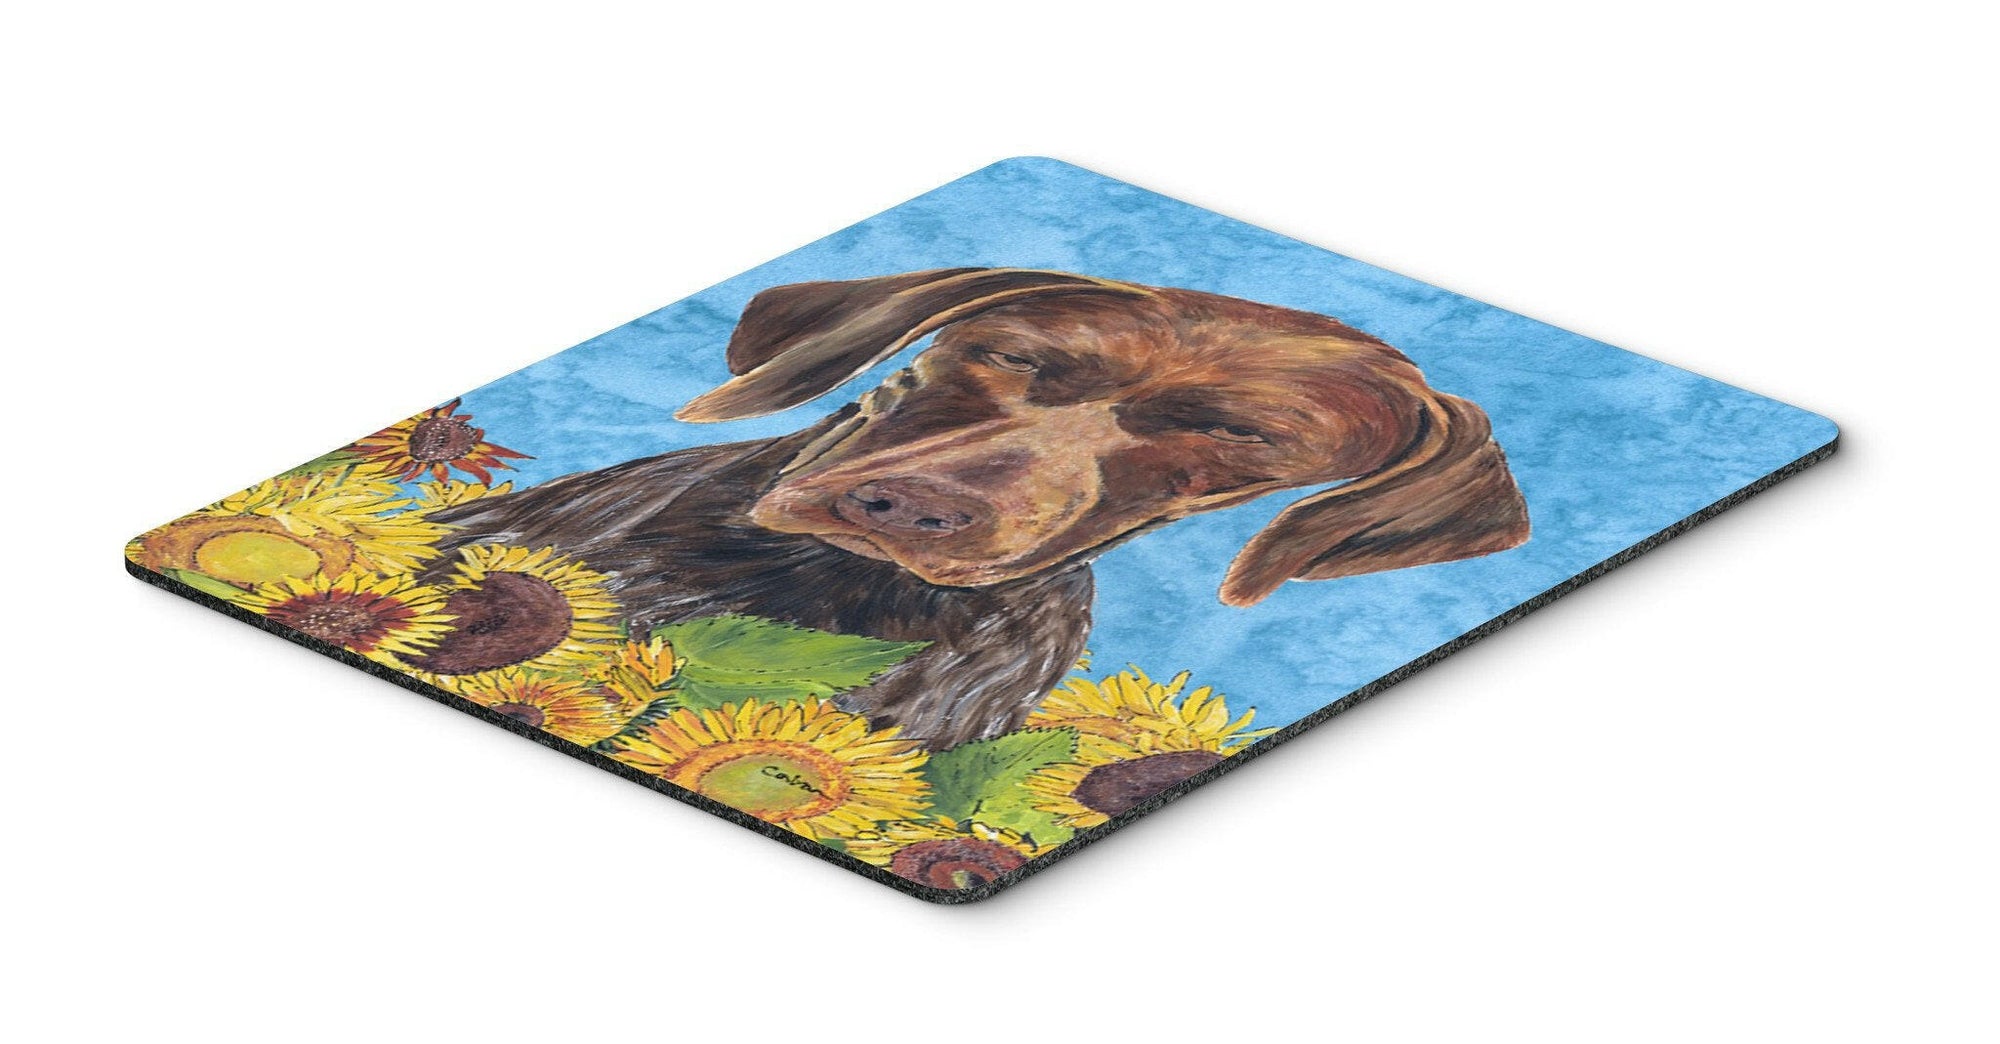 German Shorthaired Pointer Mouse Pad, Hot Pad or Trivet by Caroline's Treasures